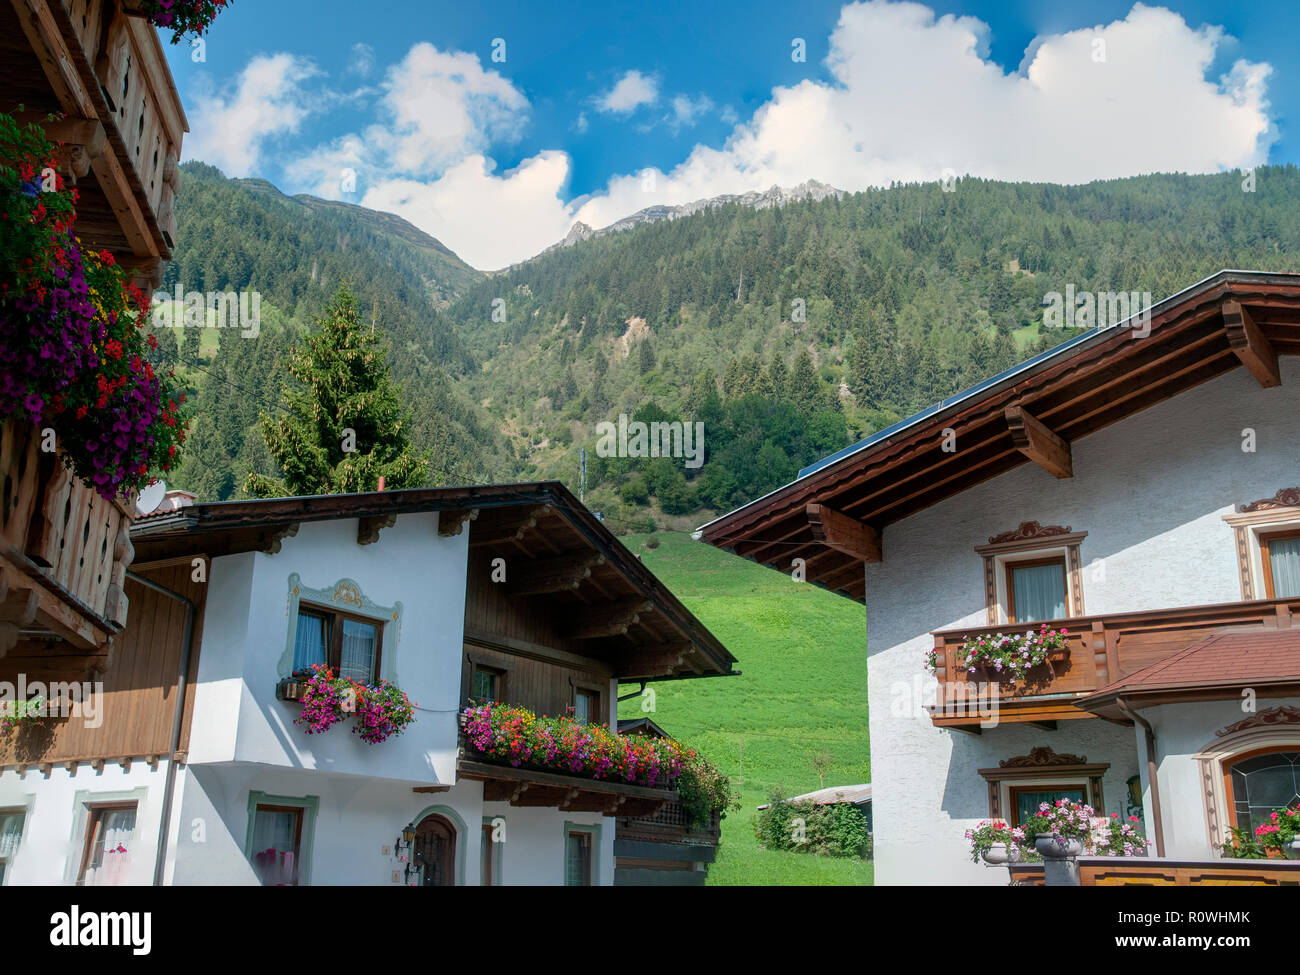 Flowering flower boxes on a balcony on a typical house in Neustift im Stubaital, Tyrol, Austria Stock Photo